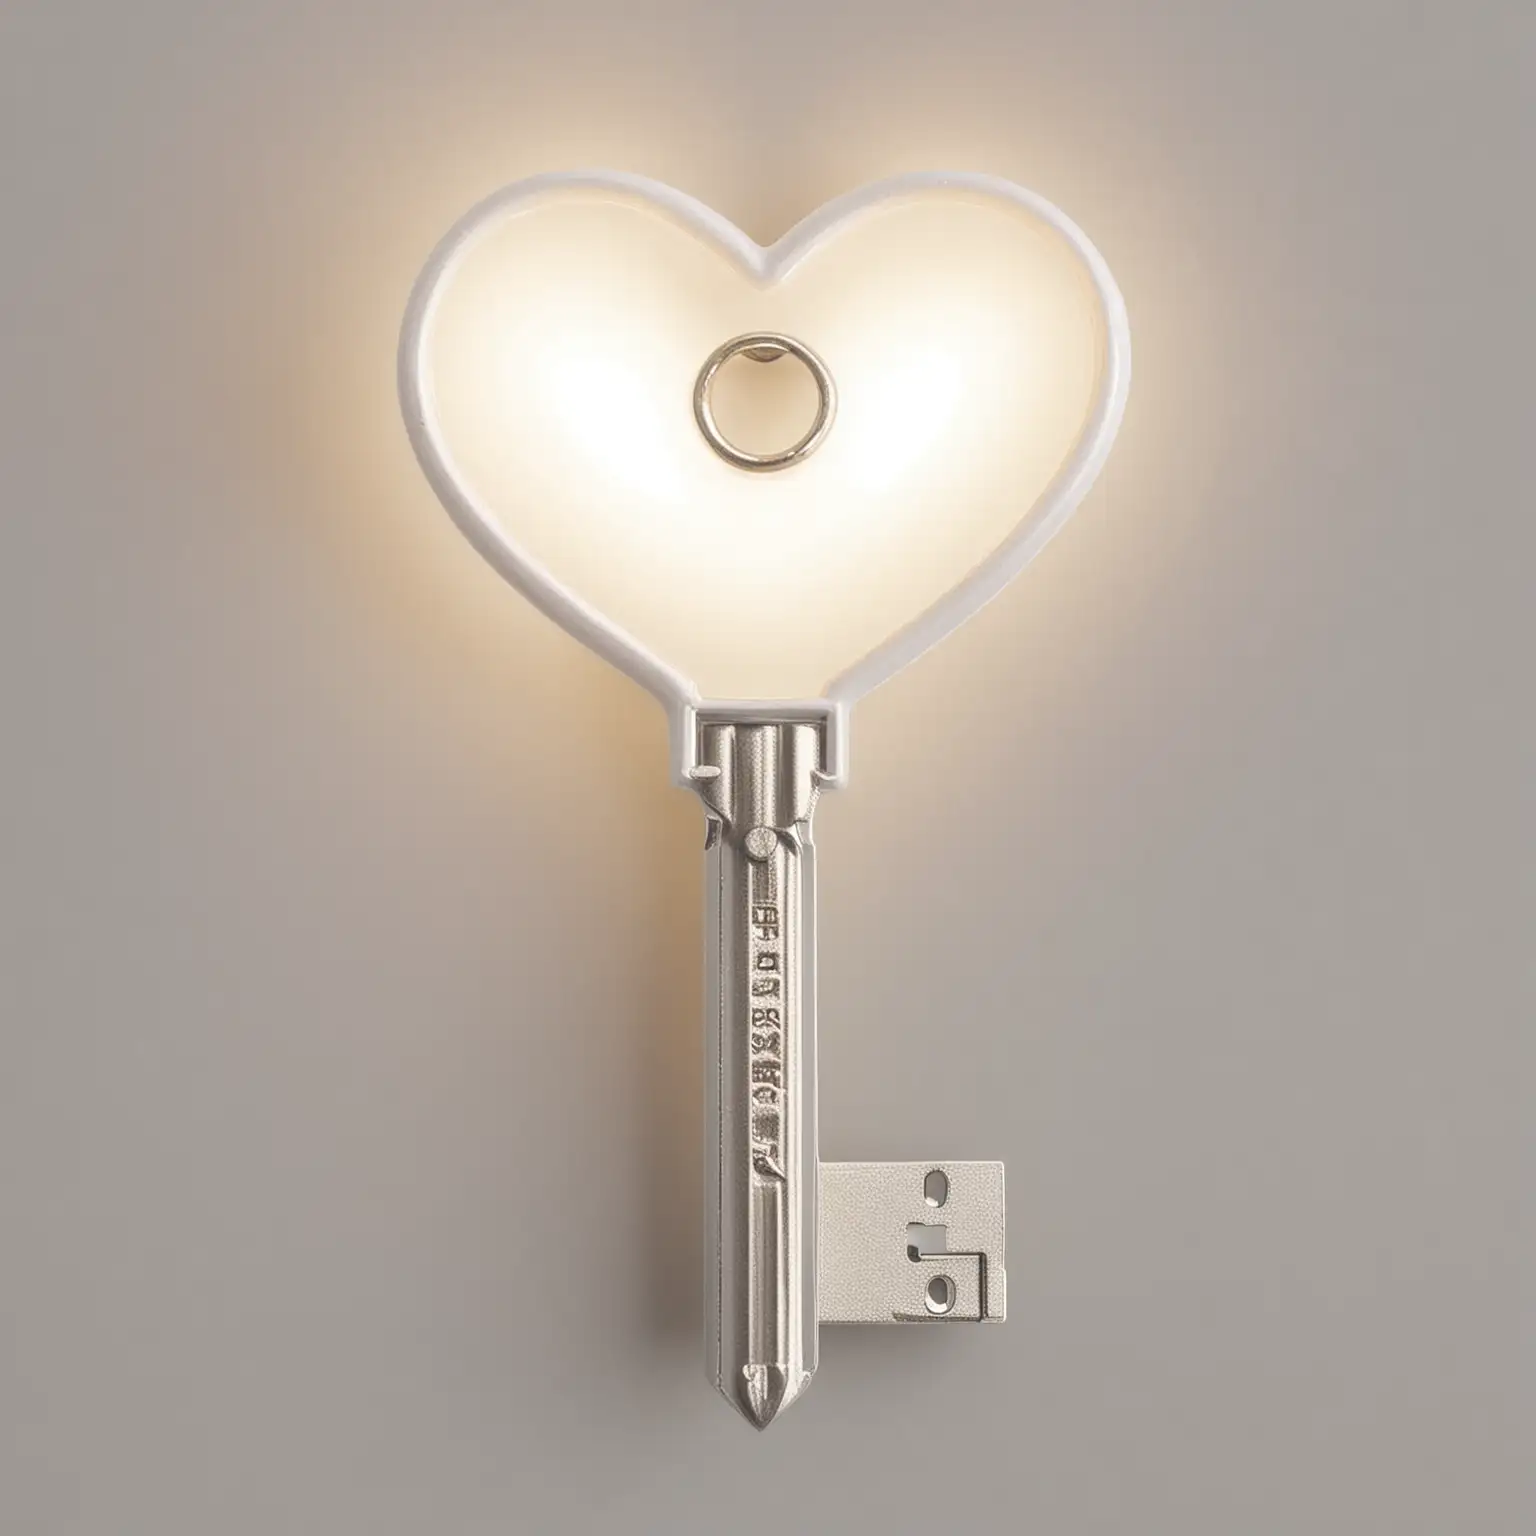 Shining AllWhite Classic Key with HeartShaped Top